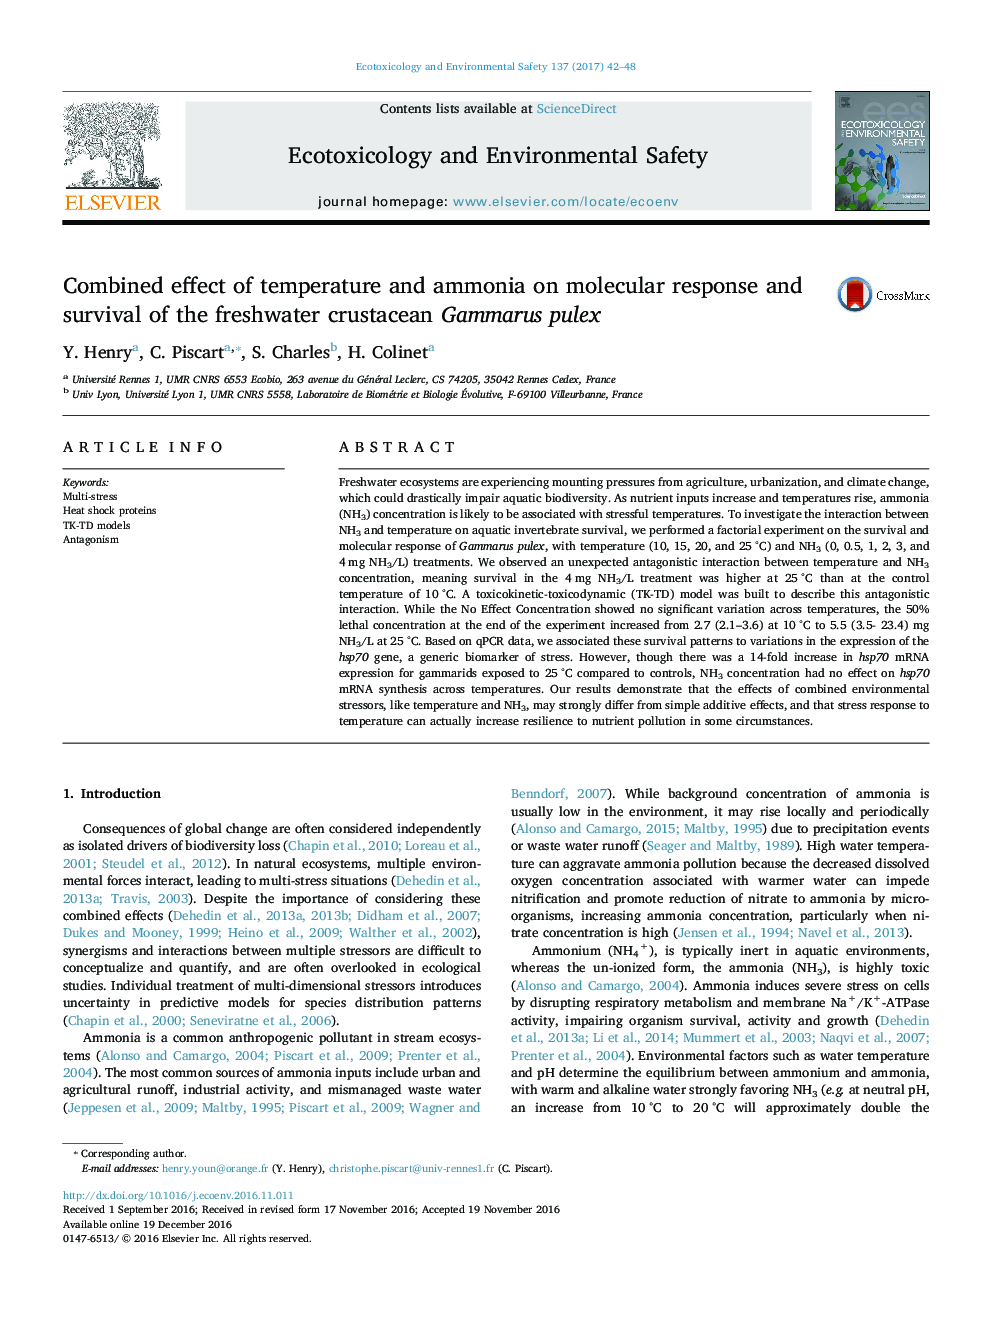 Combined effect of temperature and ammonia on molecular response and survival of the freshwater crustacean Gammarus pulex